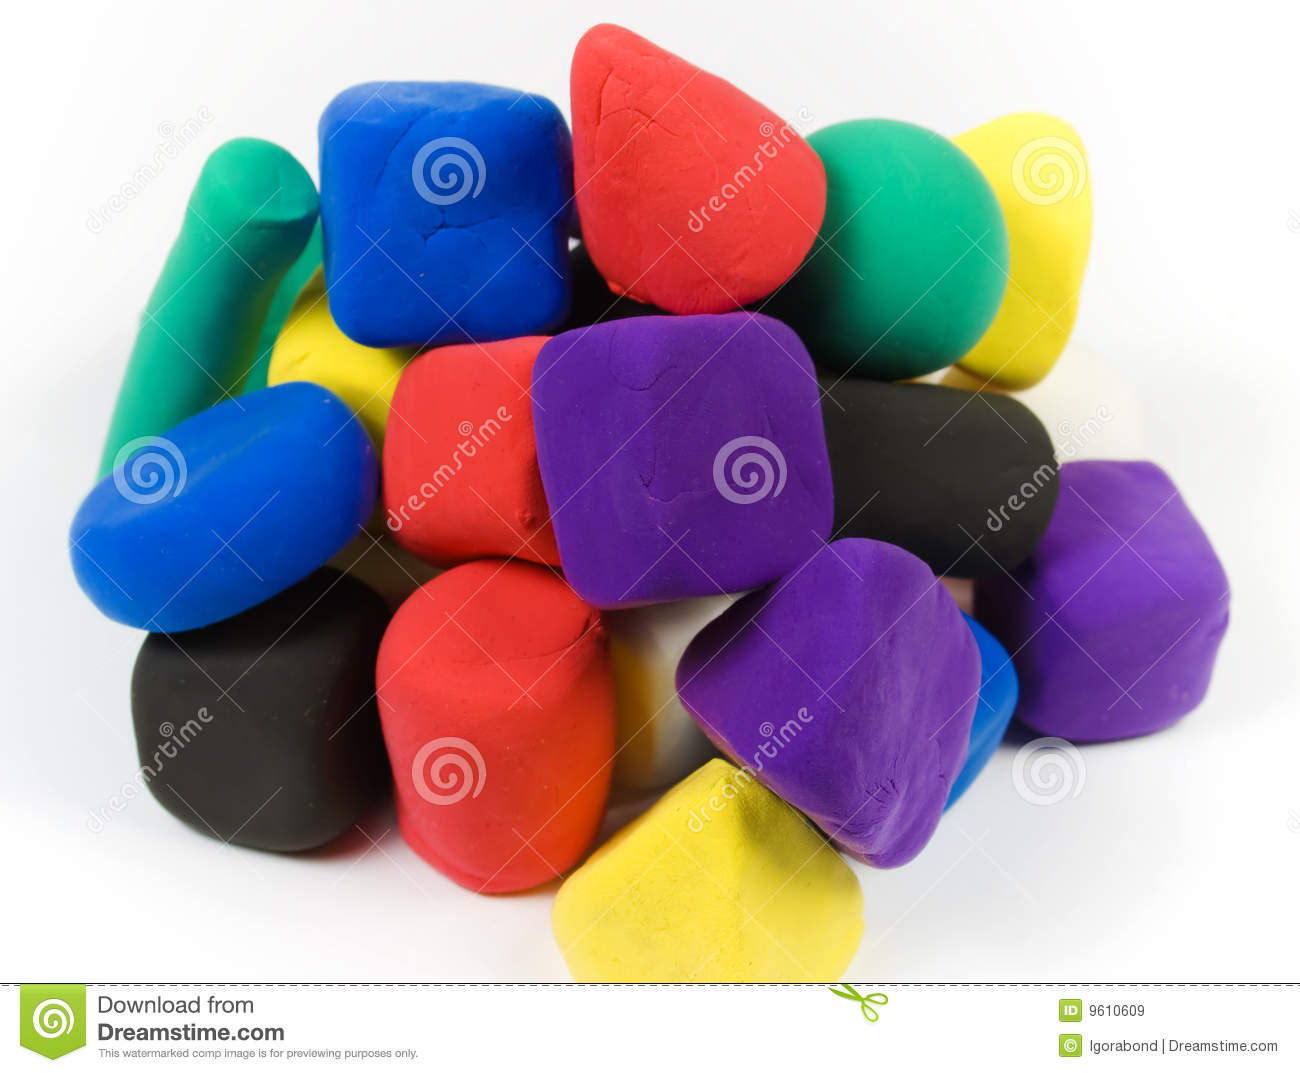 Modeling Clay Shapes Royalty Free Stock Images   Image  9610609